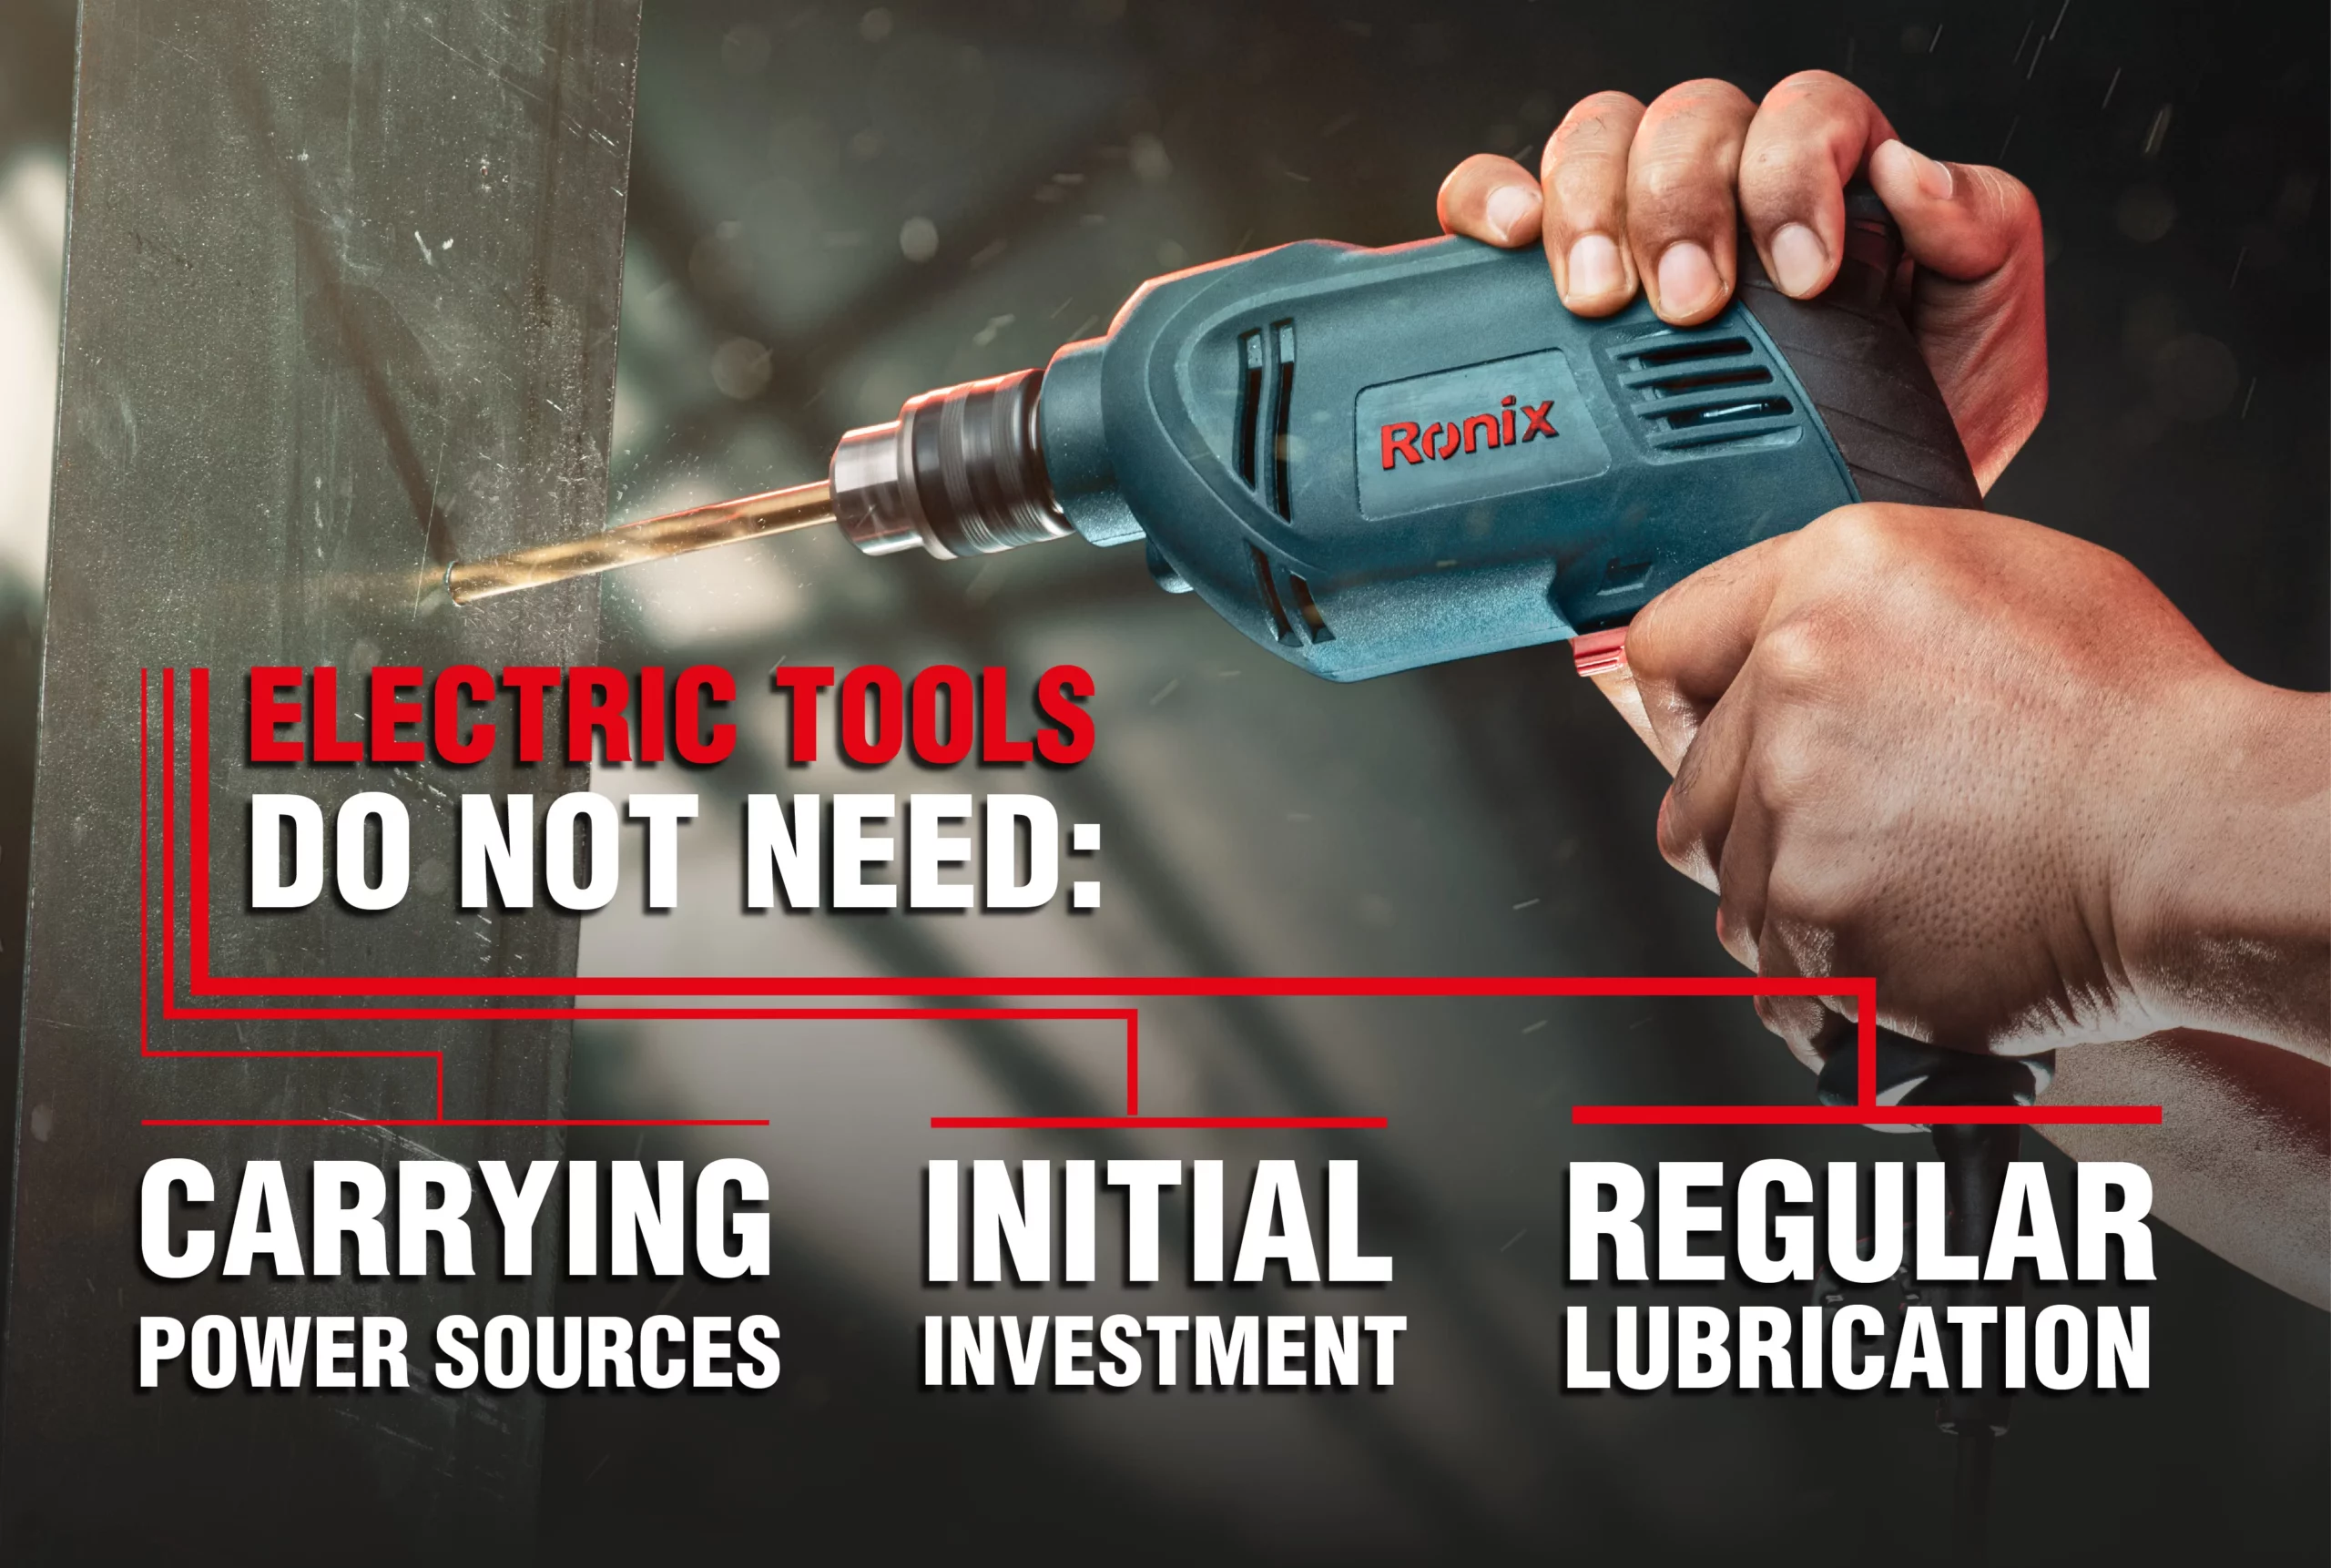 An Infographic about the Advantages of Electric Drills